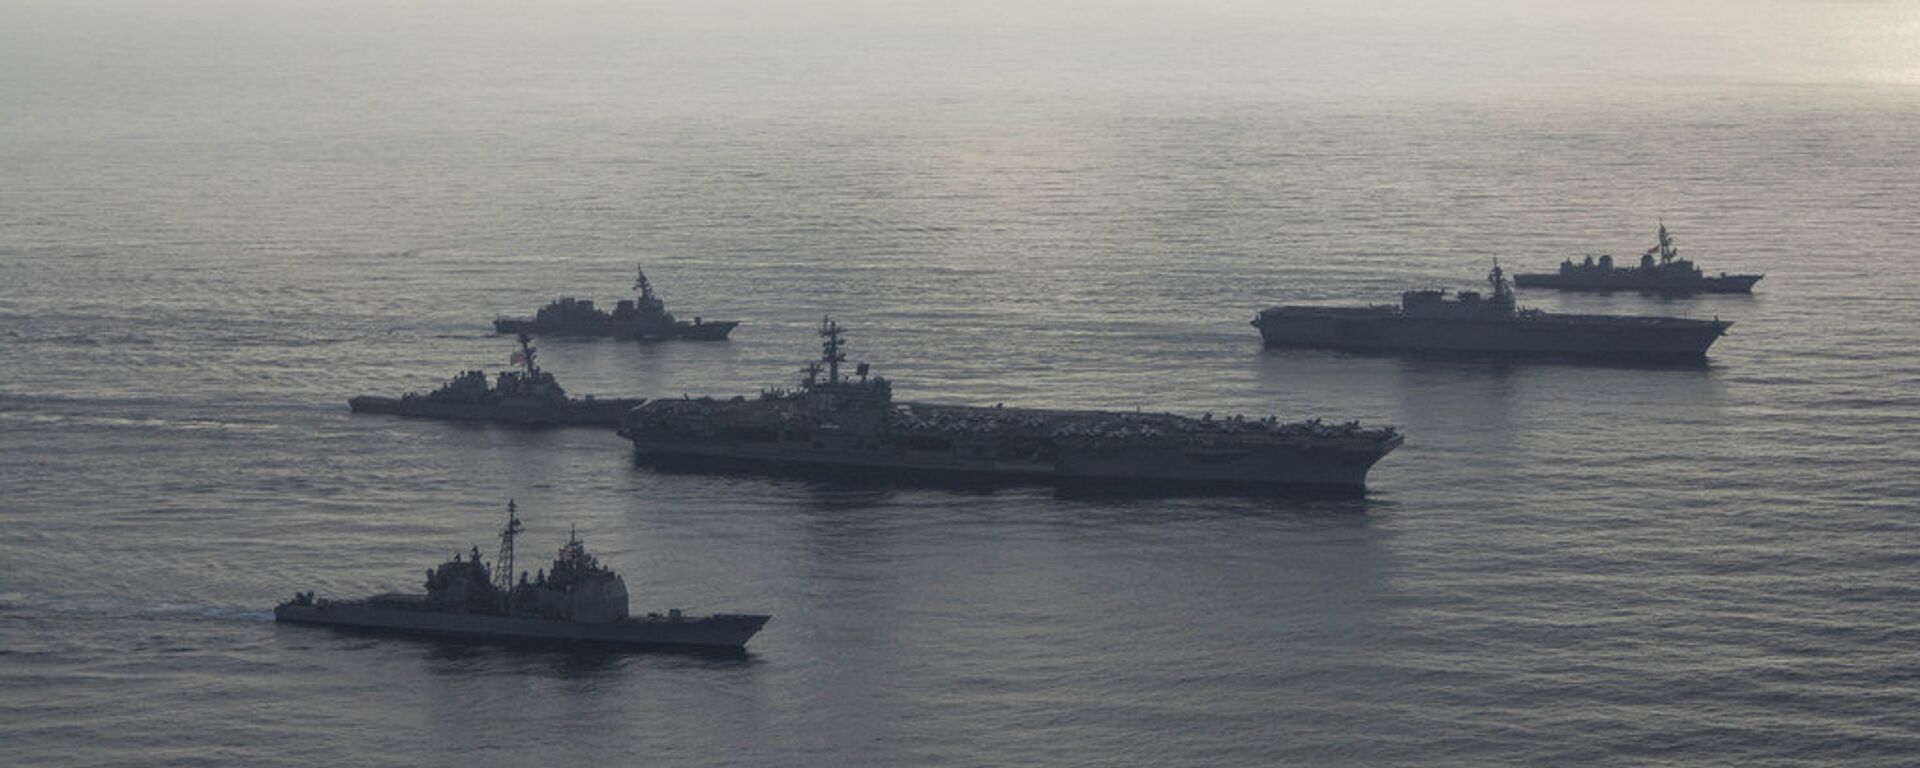 The aircraft carrier USS Ronald Reagan (CVN 76), second from bottom, lead ship of the Ronald Reagan Carrier Strike Group, the guided-missile cruiser USS Antietam (CG 54), bottom, and the guided-missile destroyer USS Milius (DDG 69), left, conduct a photo exercise with the Japan Maritime Self-Defense Force (JMSDF) helicopter destroyer JS Kaga (DDH 184), second from top, and the JMSDF destroyers JS Inazuma (DD 105) and JS Suzutsuki (DD 117). The Ronald Reagan Carrier Strike Group is forward-deployed to the U.S. 7th Fleet area of operations in support of security and stability in the Indo-Pacific region. - Sputnik International, 1920, 16.07.2023